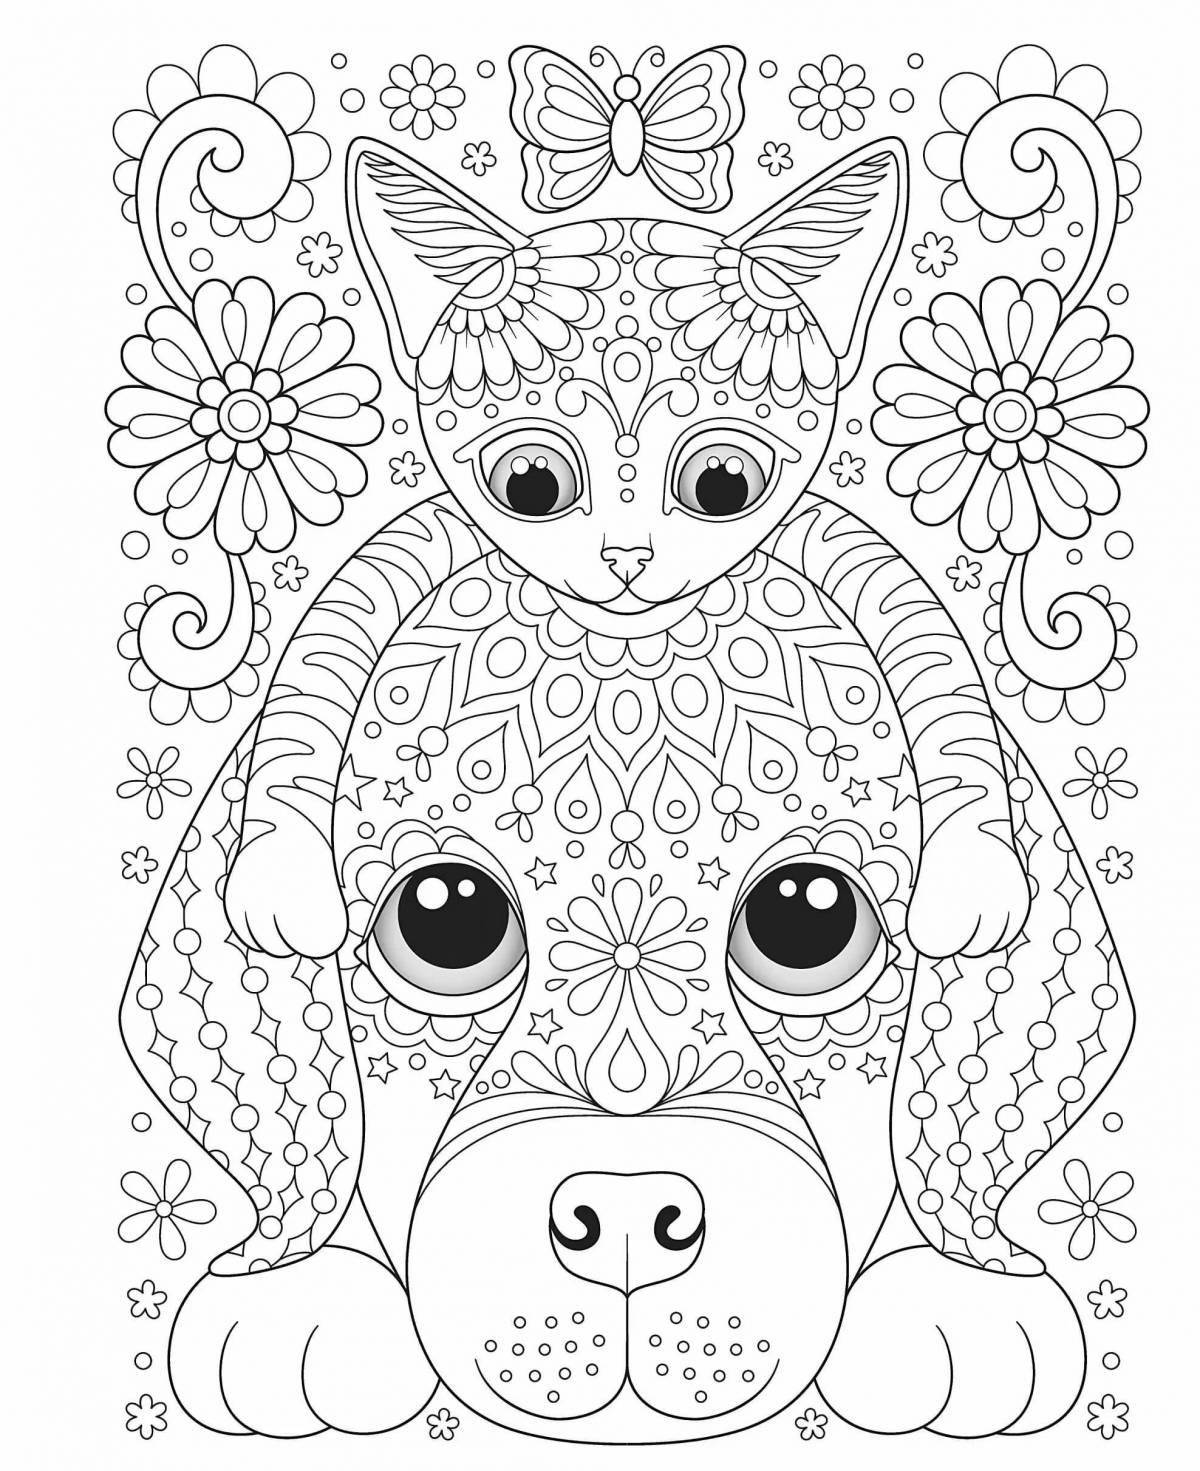 Soothing anti-stress coloring book for children